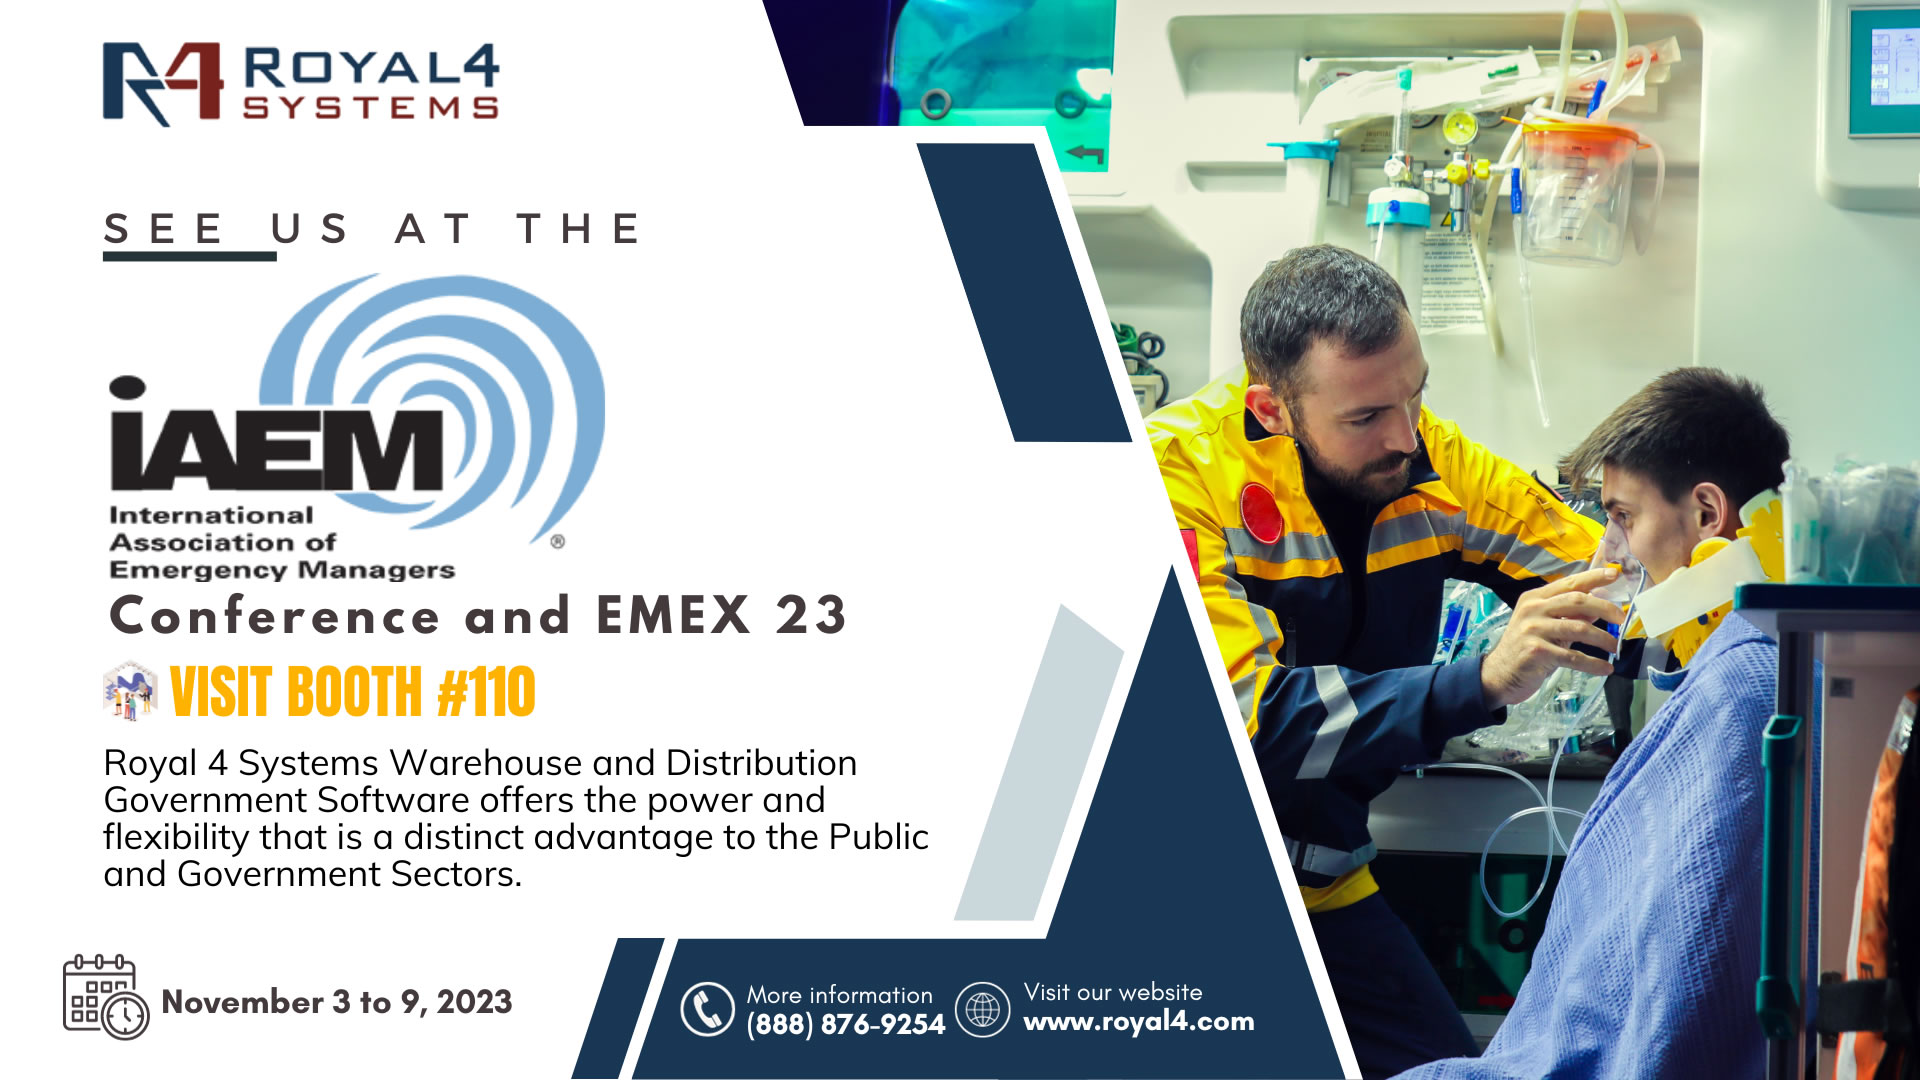 Royal 4 Systems to Exhibit at IAEM Annual Conference & EMEX 23